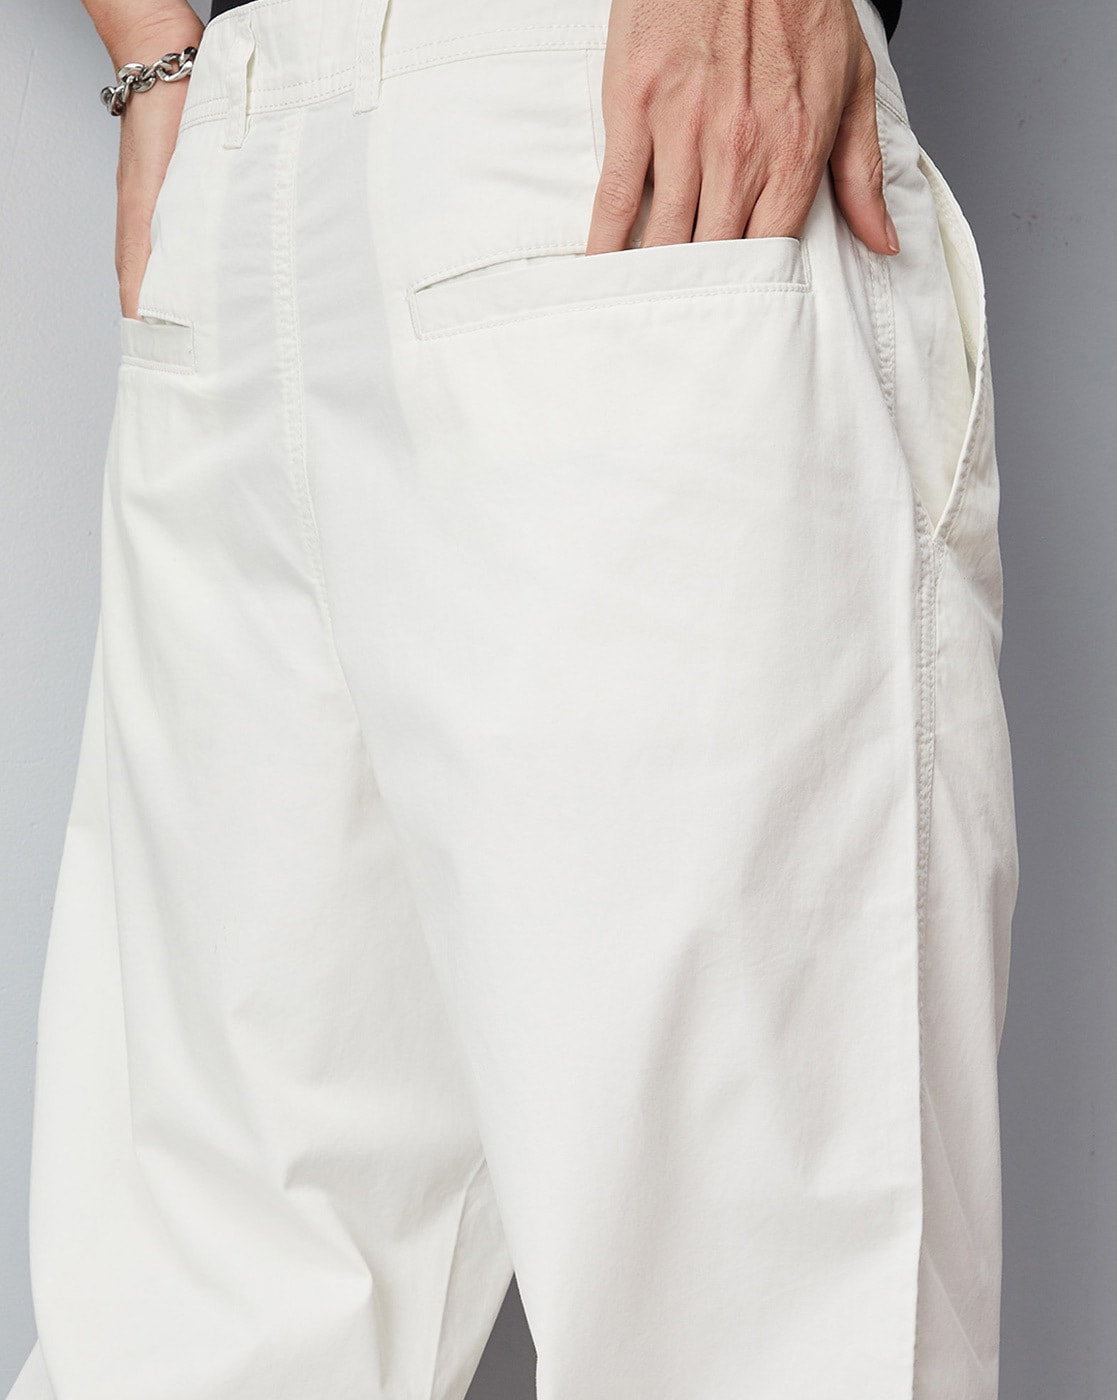 Buy Off White Trousers & Pants for Men by MAX Online